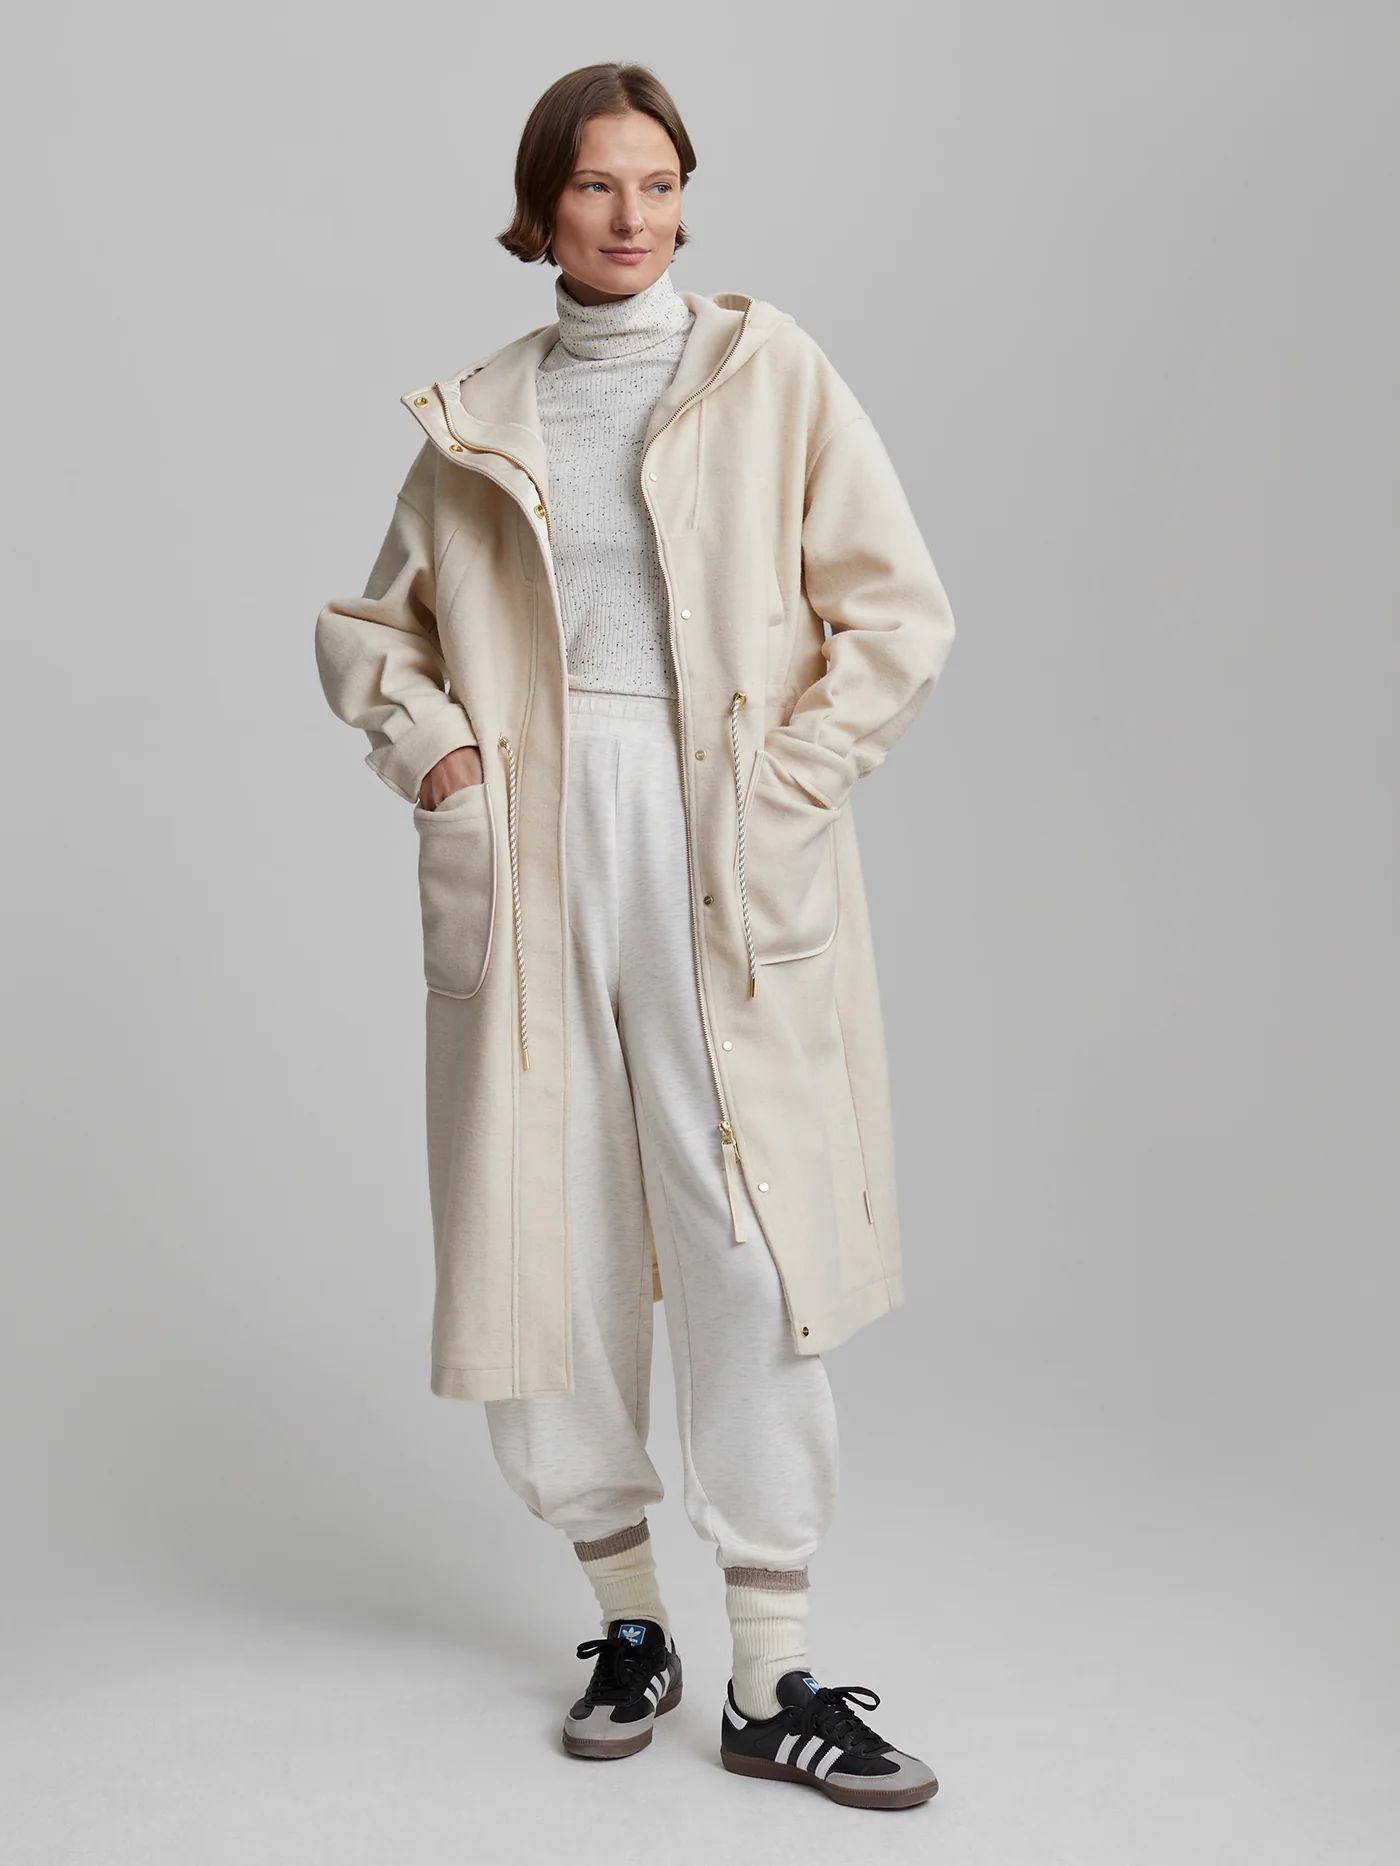 Durham Fleece CoatLongline and oversized, the Durham coat effortlessly combines style and warmth ... | Varley USA